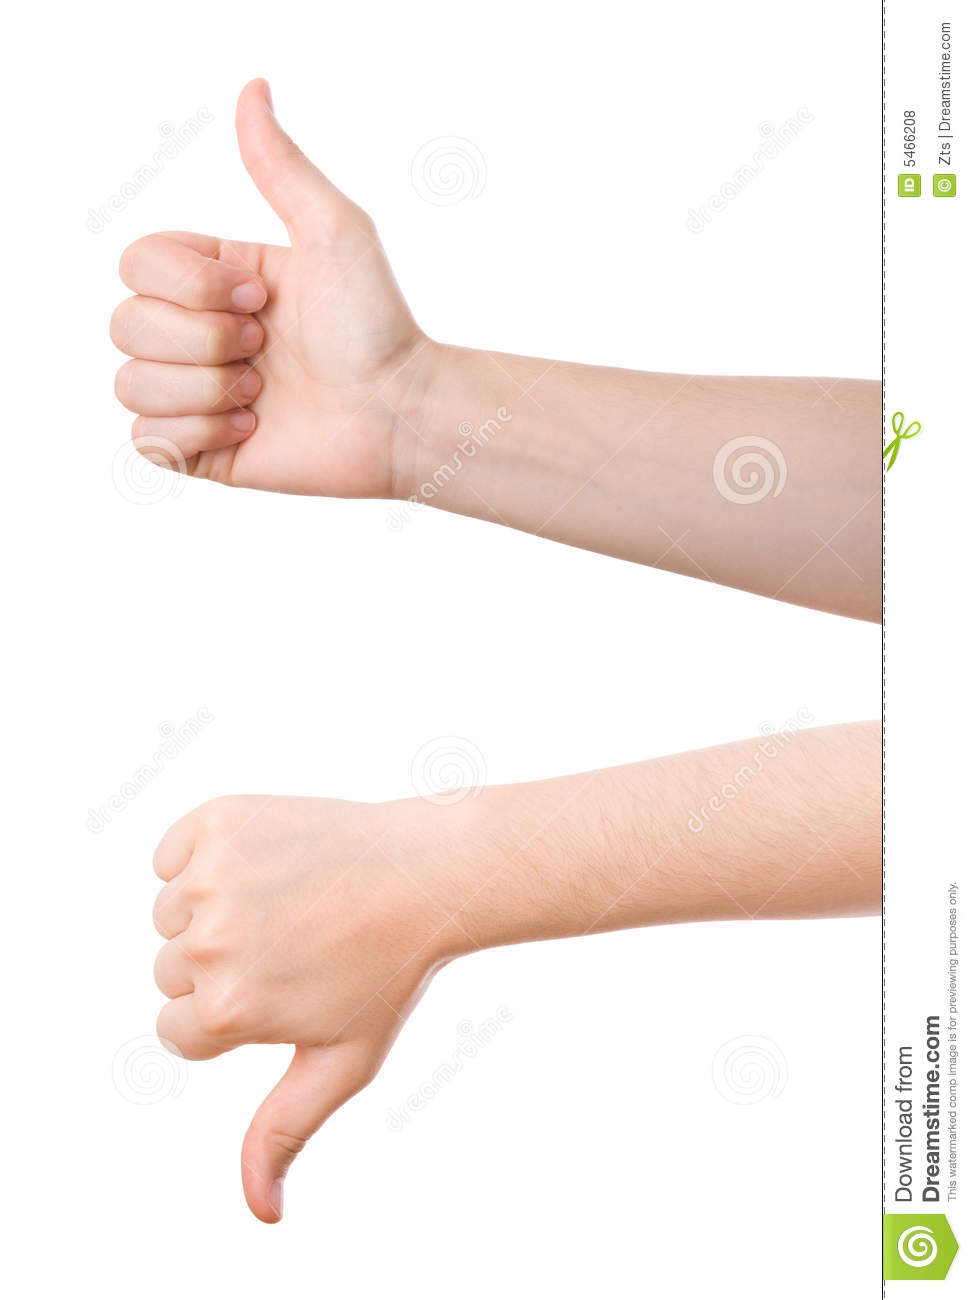 Thumbs Up and Down